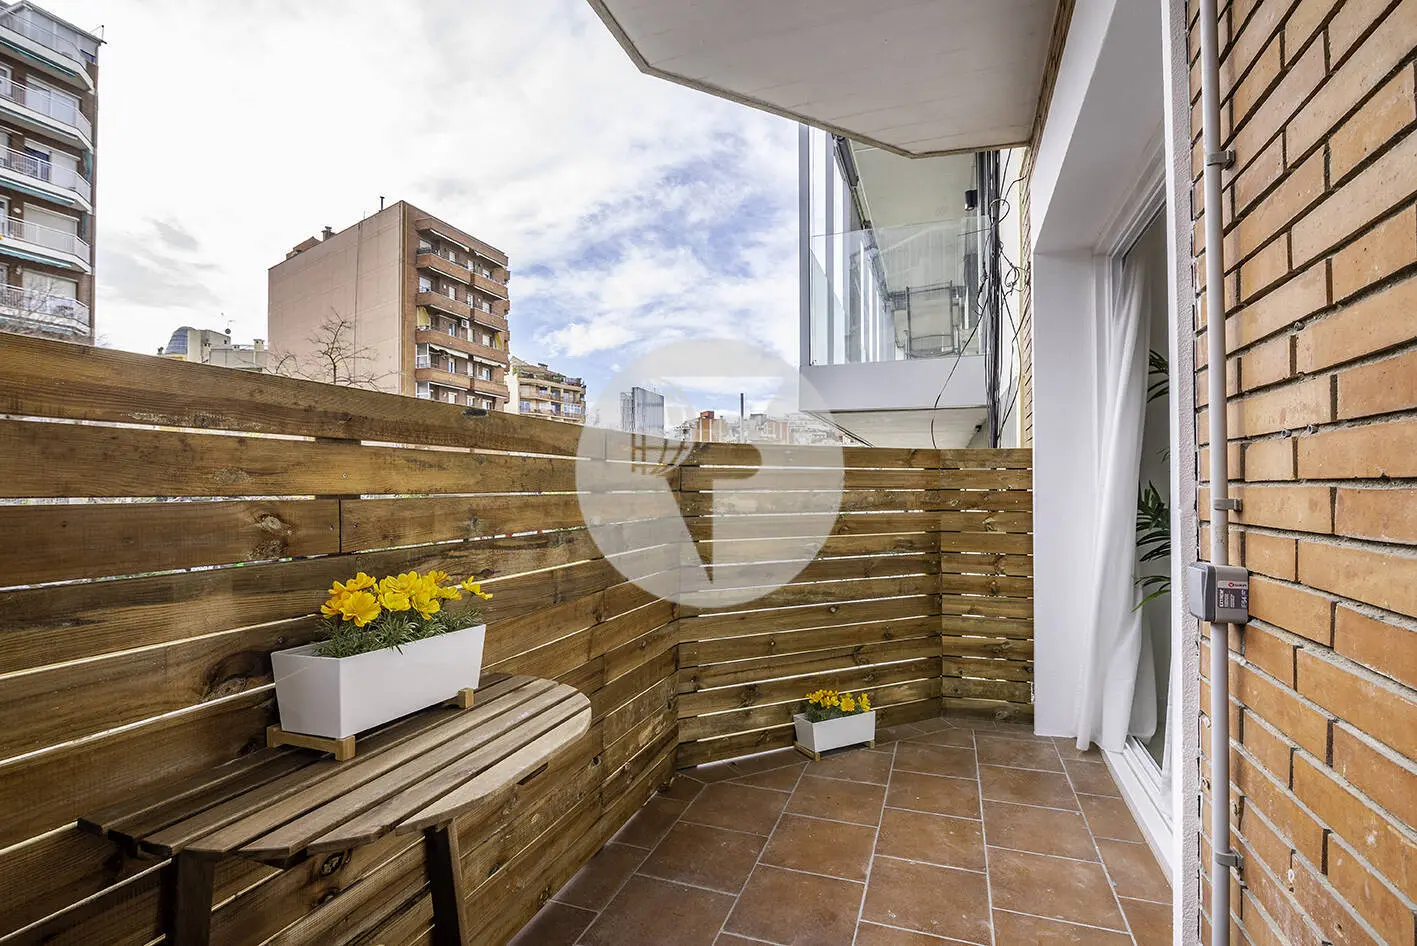 Brand new completely renovated apartment on Aragó street in the heart of El Clot in Barcelona. 10